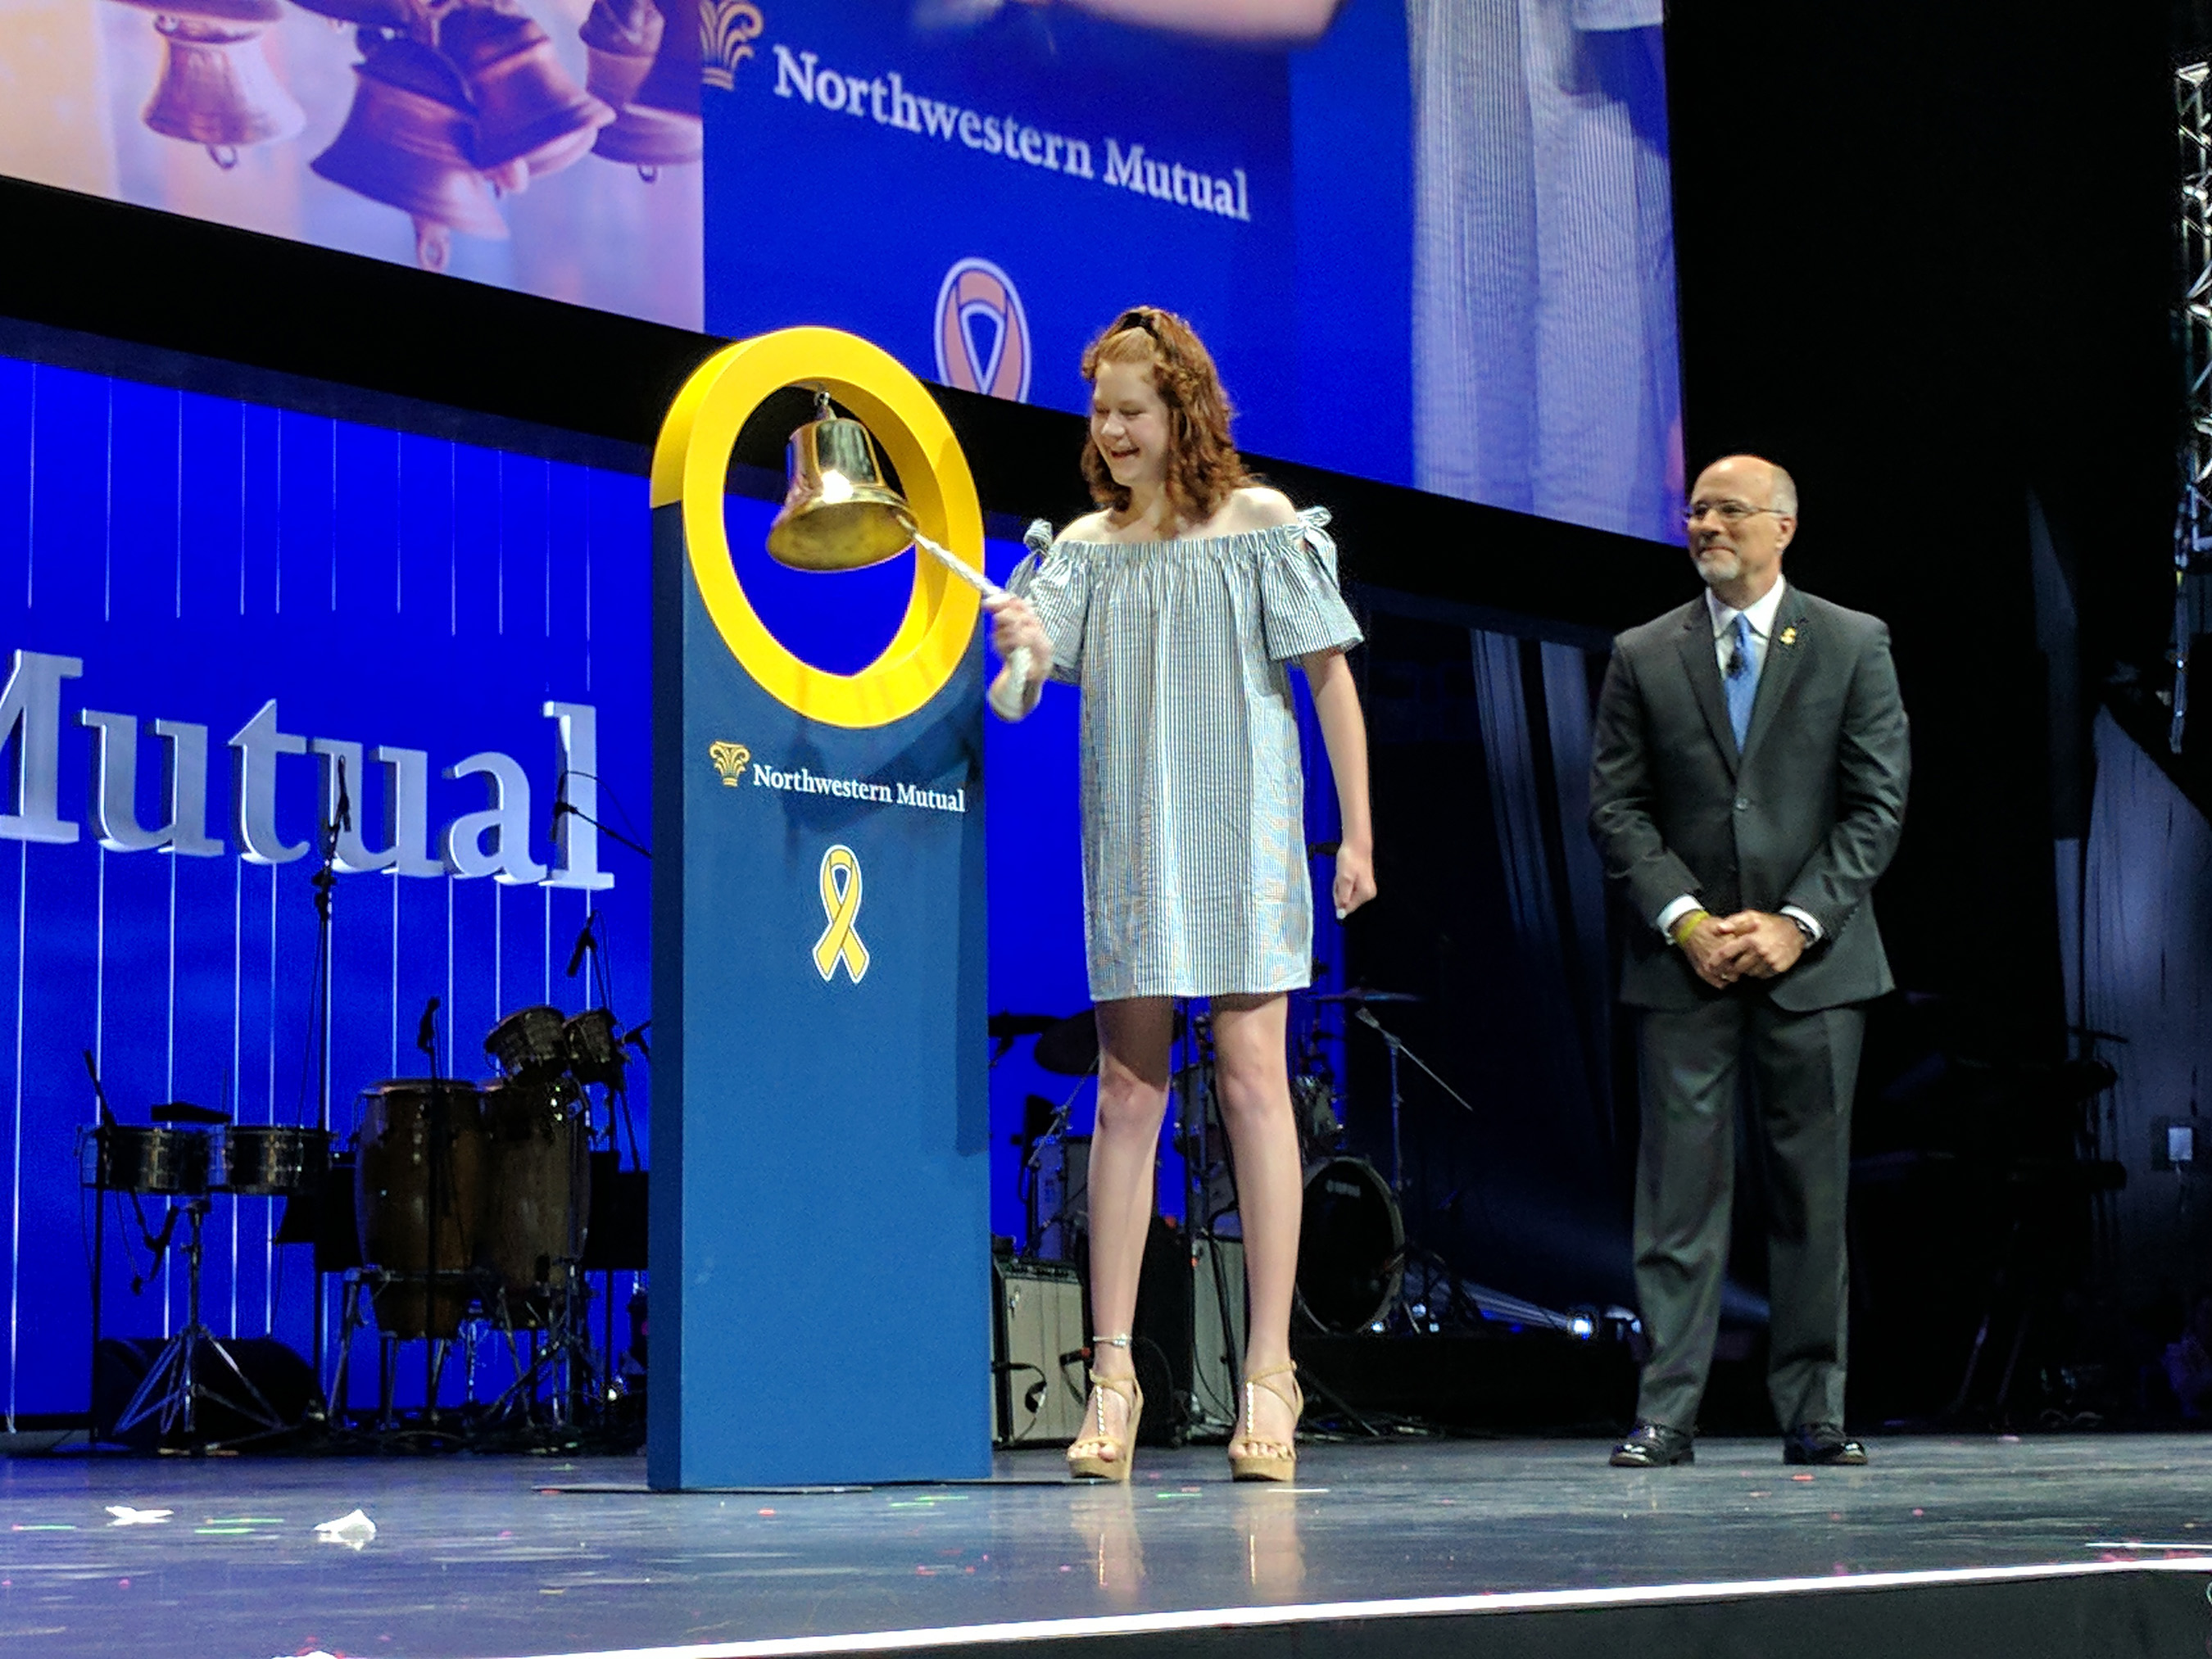 Childhood cancer survivor Peyton Richardson rings a bell at Northwestern Mutual’s Annual Meeting to symbolize the end of her treatment and celebrate the company’s dedication to the fight.